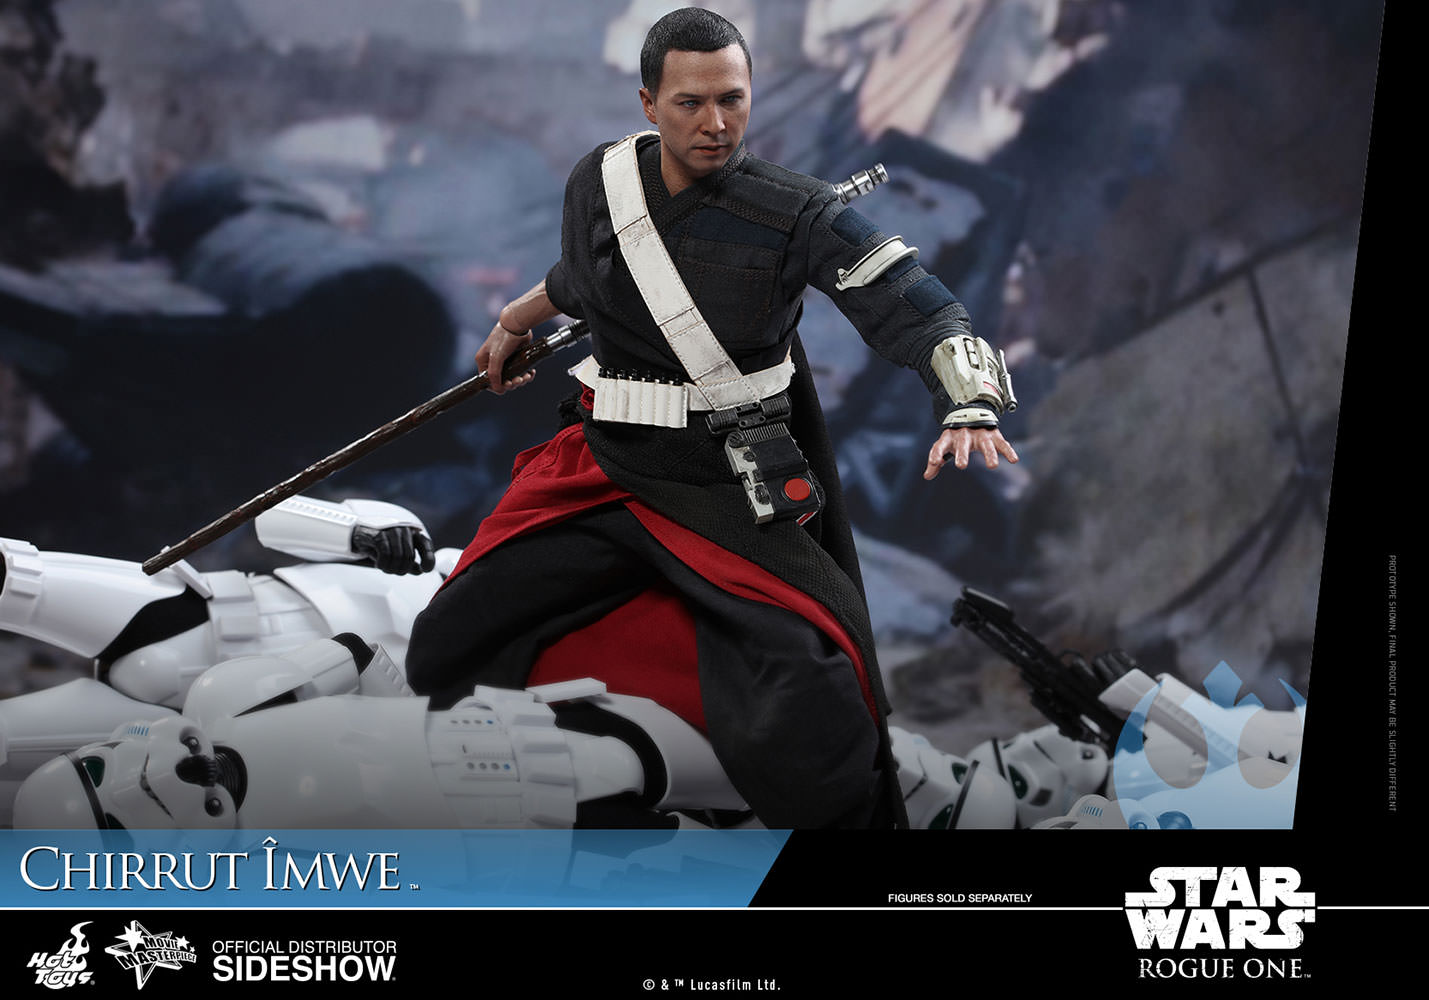 Chirrut Îmwe (Deluxe Version) Sixth Scale Figure by Hot Toys